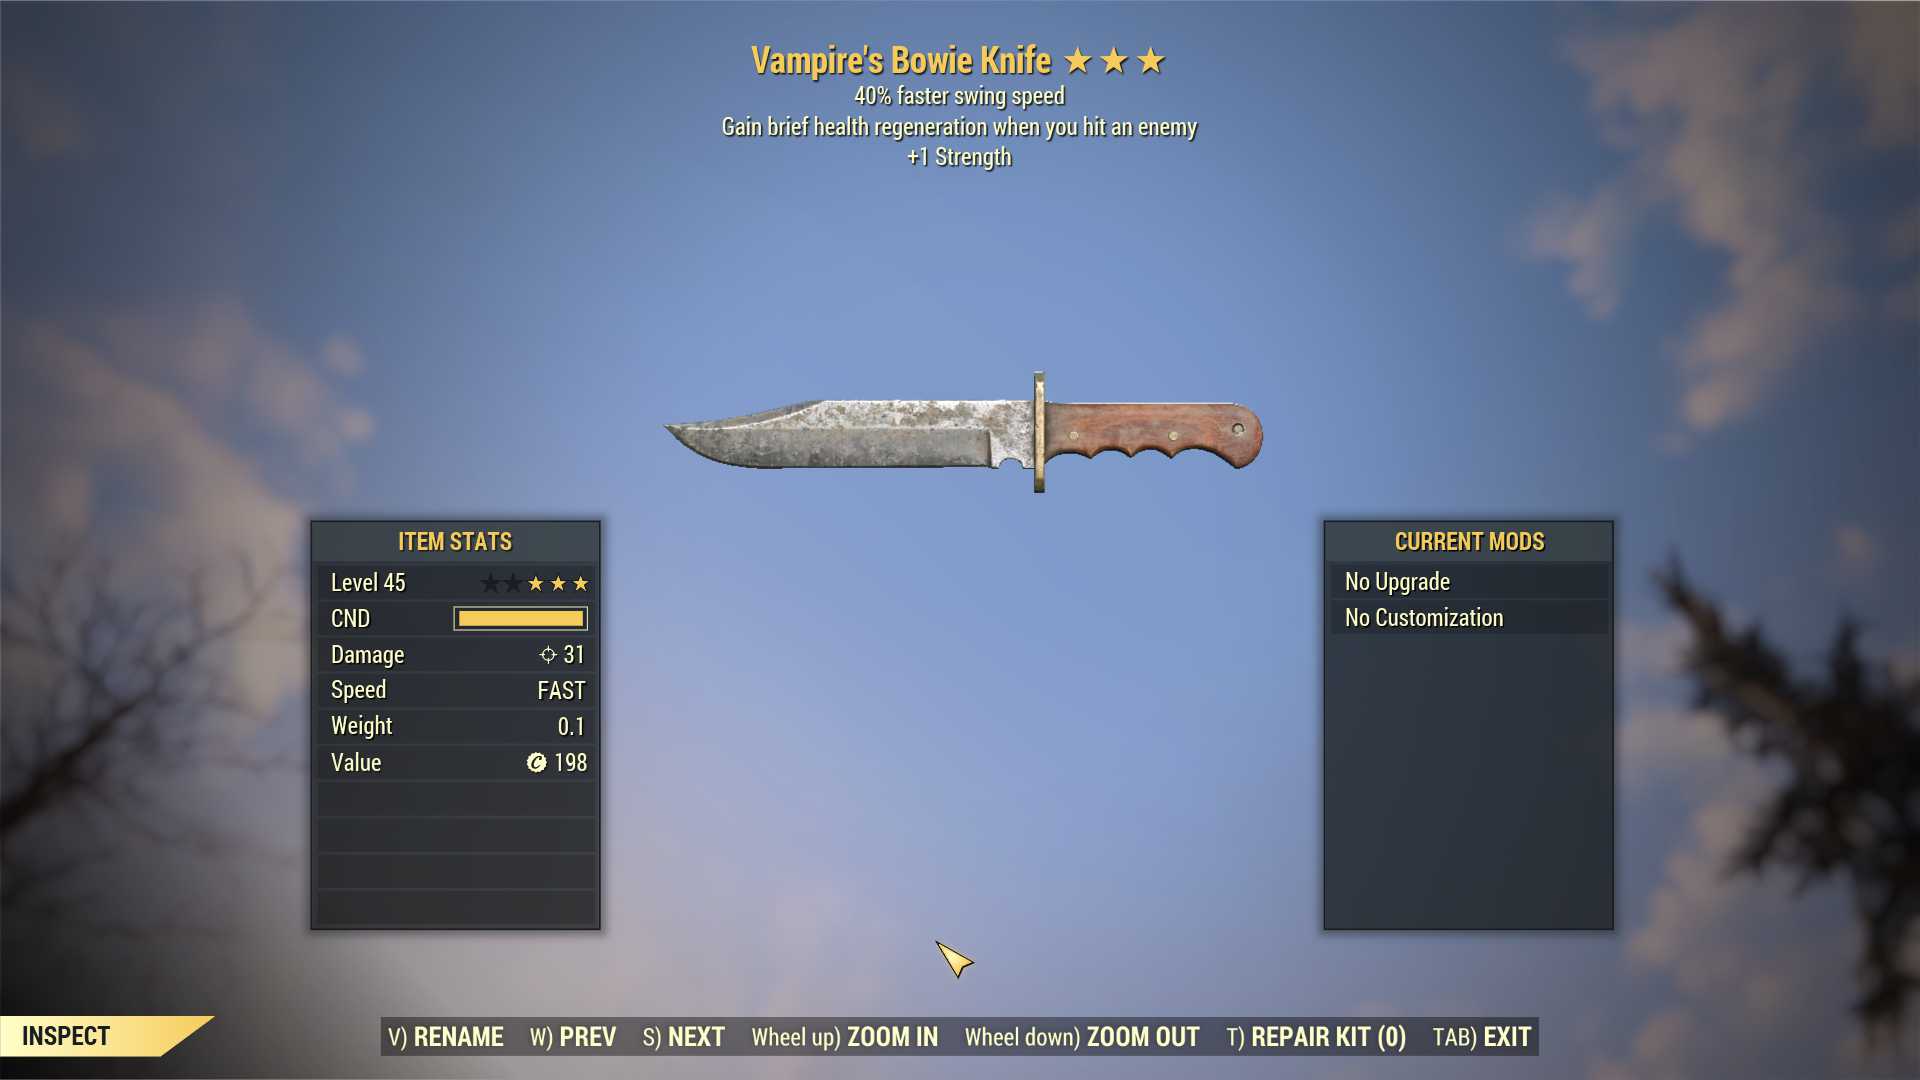 Vampire's Bowie Knife (40% Faster Swing Speed, +1 Strength)